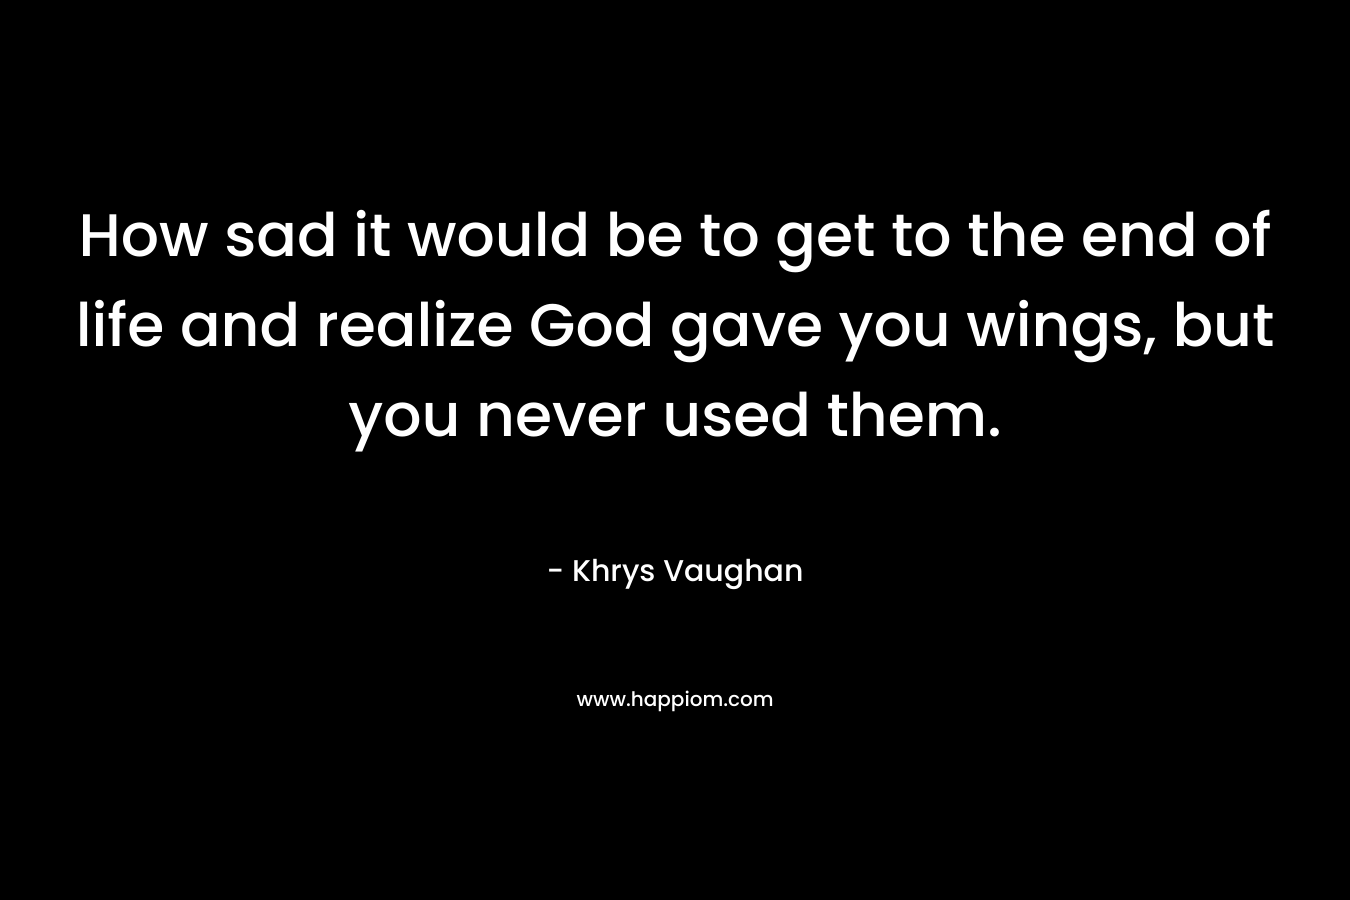 How sad it would be to get to the end of life and realize God gave you wings, but you never used them.